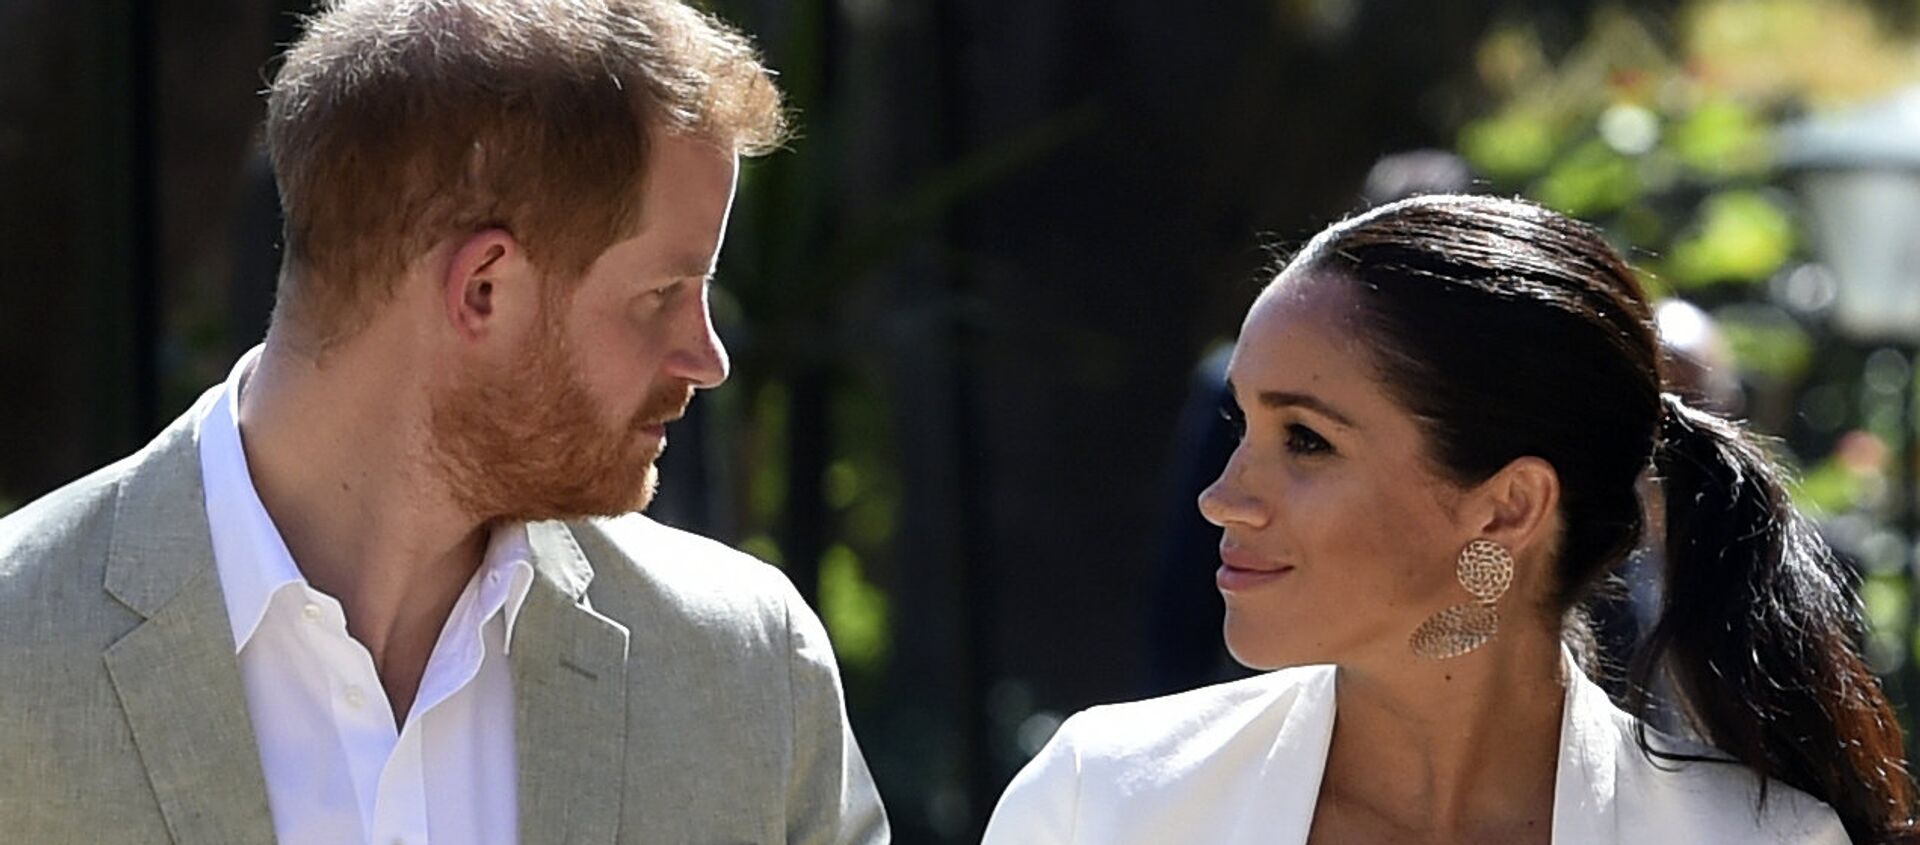 Britain's Prince Harry and Meghan, Duchess of Sussex visit the Andalusian Gardens in Rabat, Morocco, Monday, Feb. 25, 2019. The Duke and Duchess of Sussex are on a three day visit to the country. - Sputnik International, 1920, 29.08.2021